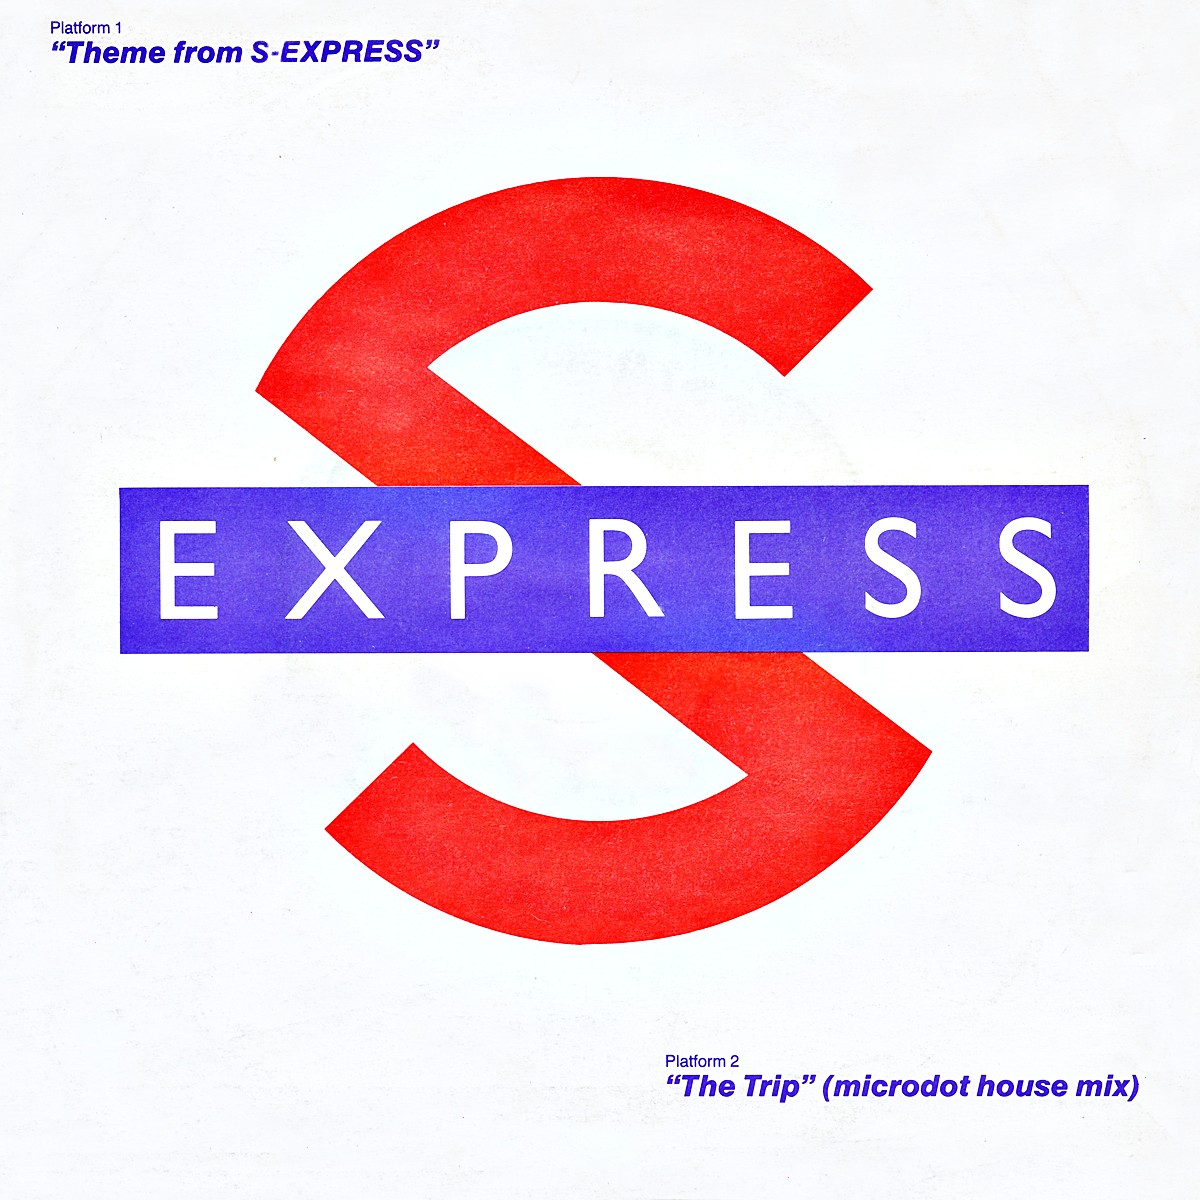 s-express-theme_from_s-express_s.jpg